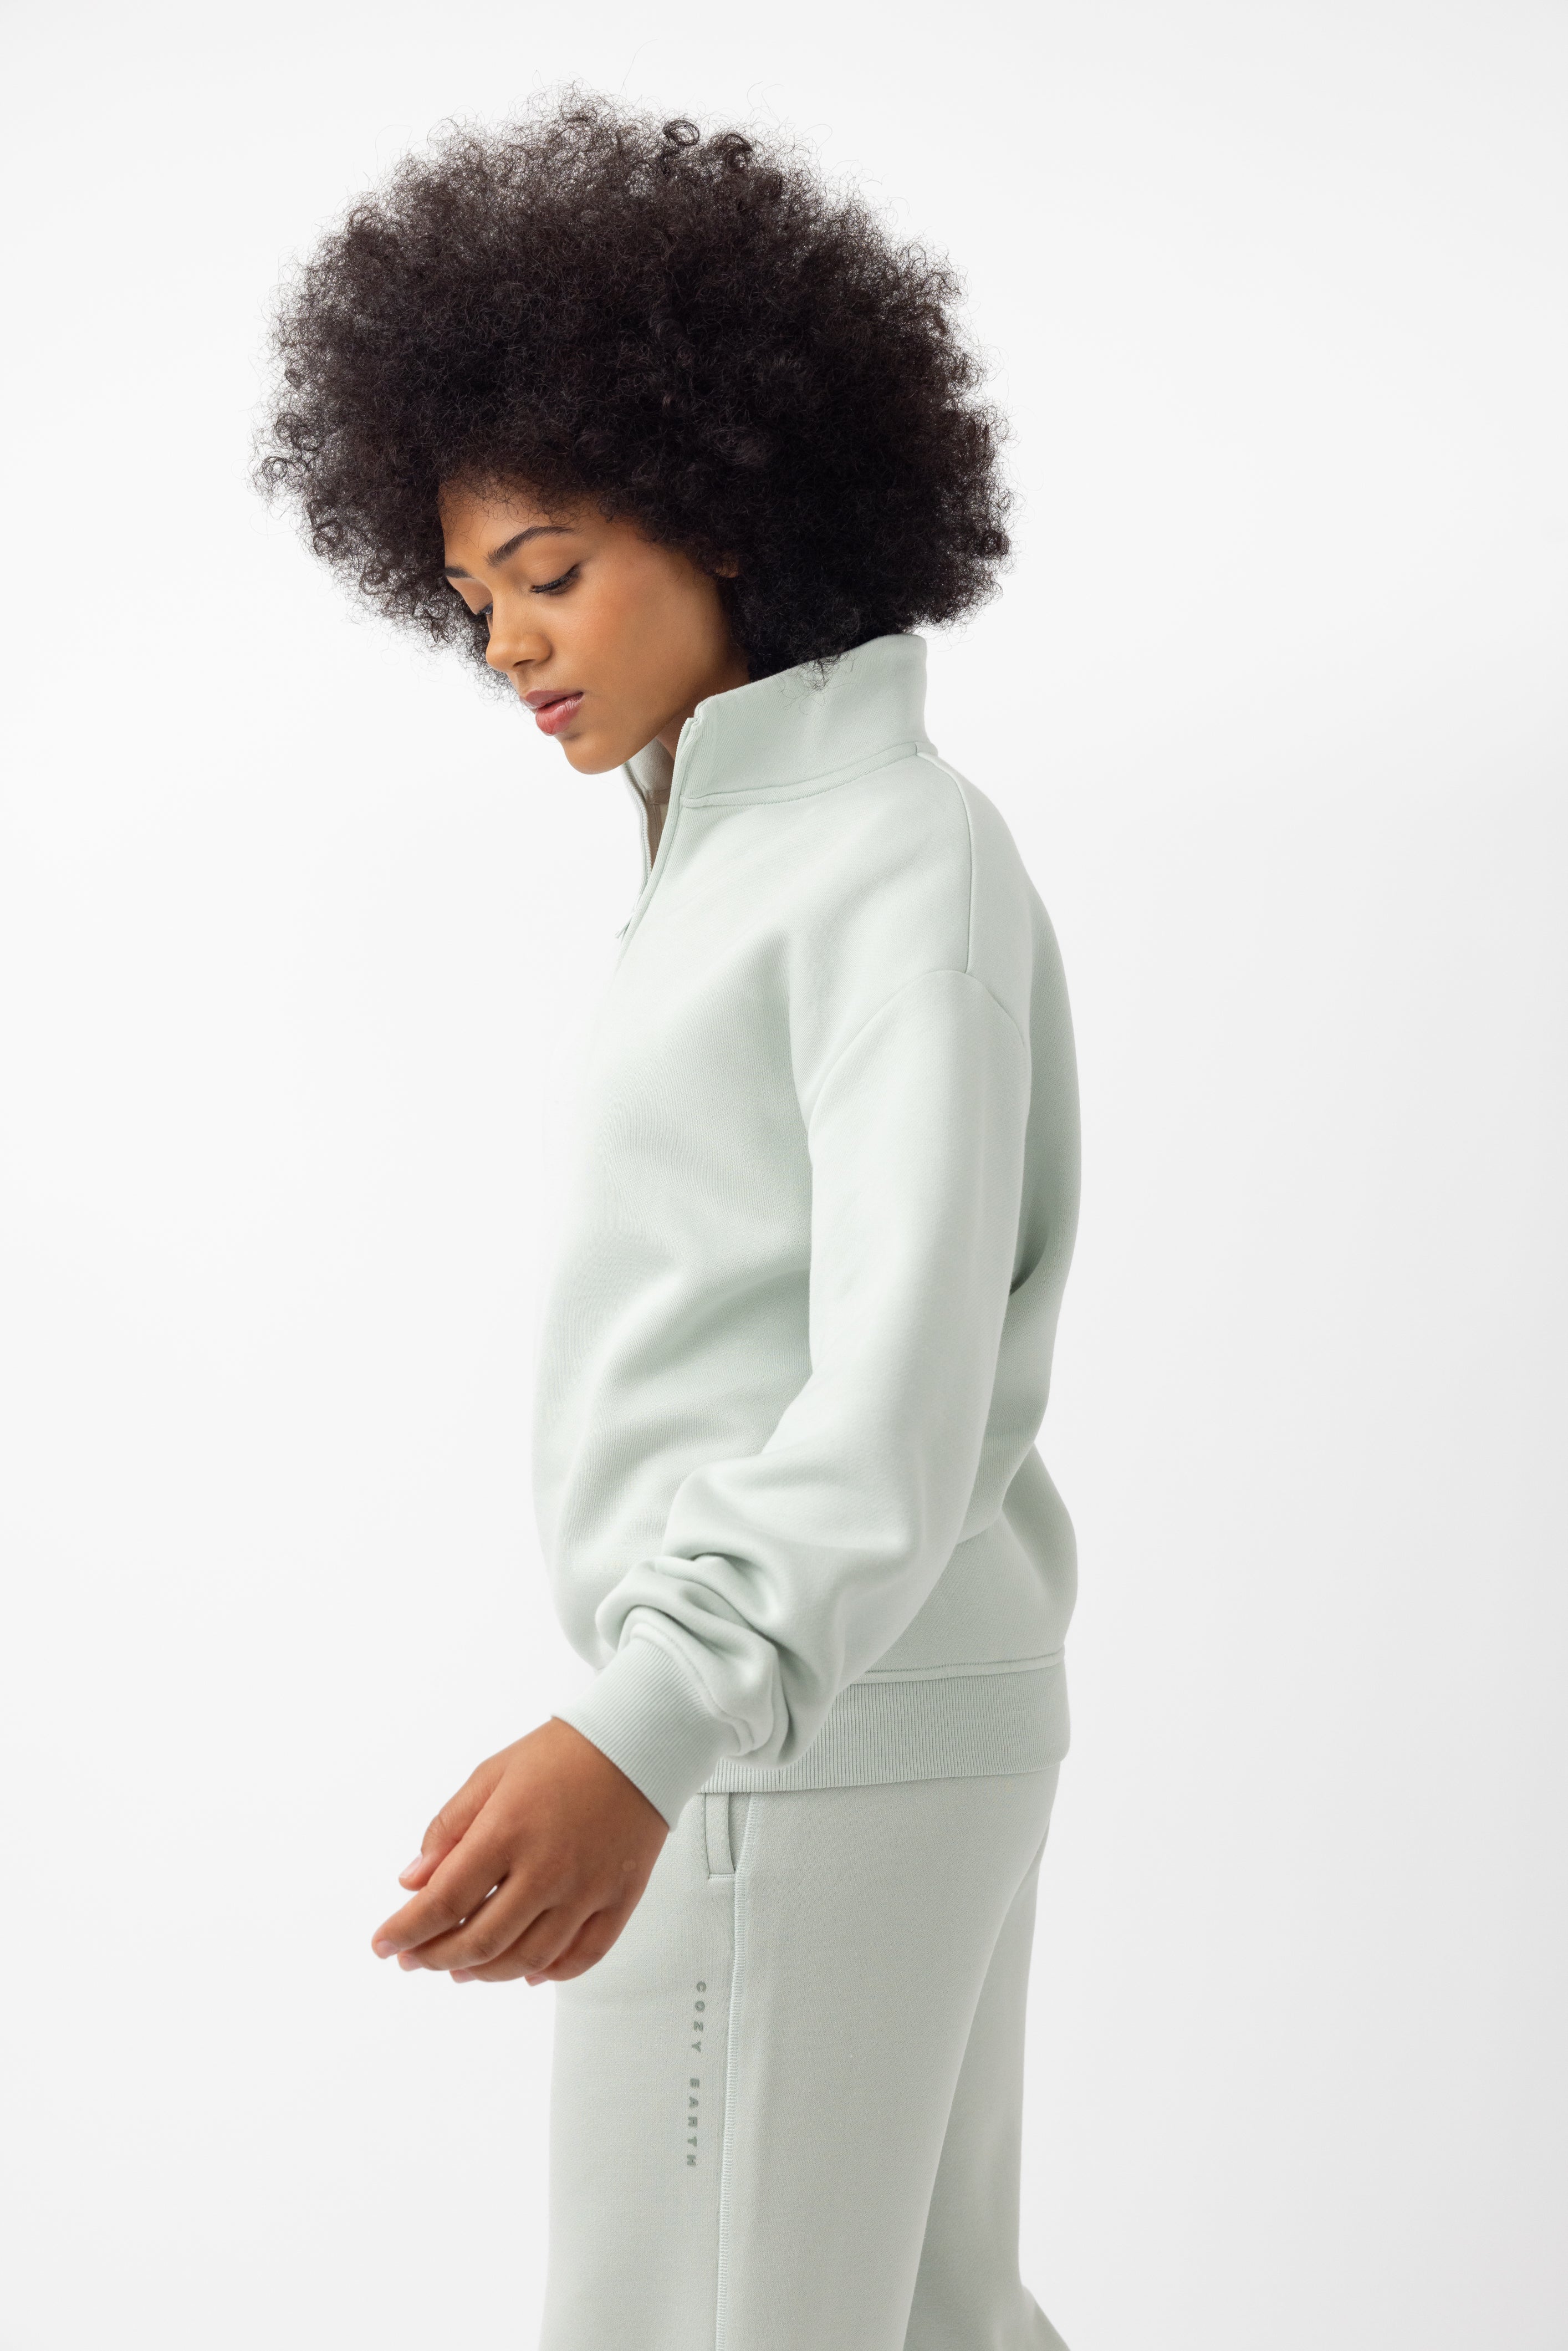 Arctic CityScape Quarter Zip. The quarter zip is being worn by a female model. The model is wearing accompanying CityScape clothing to complete the look of the quarter zip. The photo was taken with a white background. |Color:Arctic